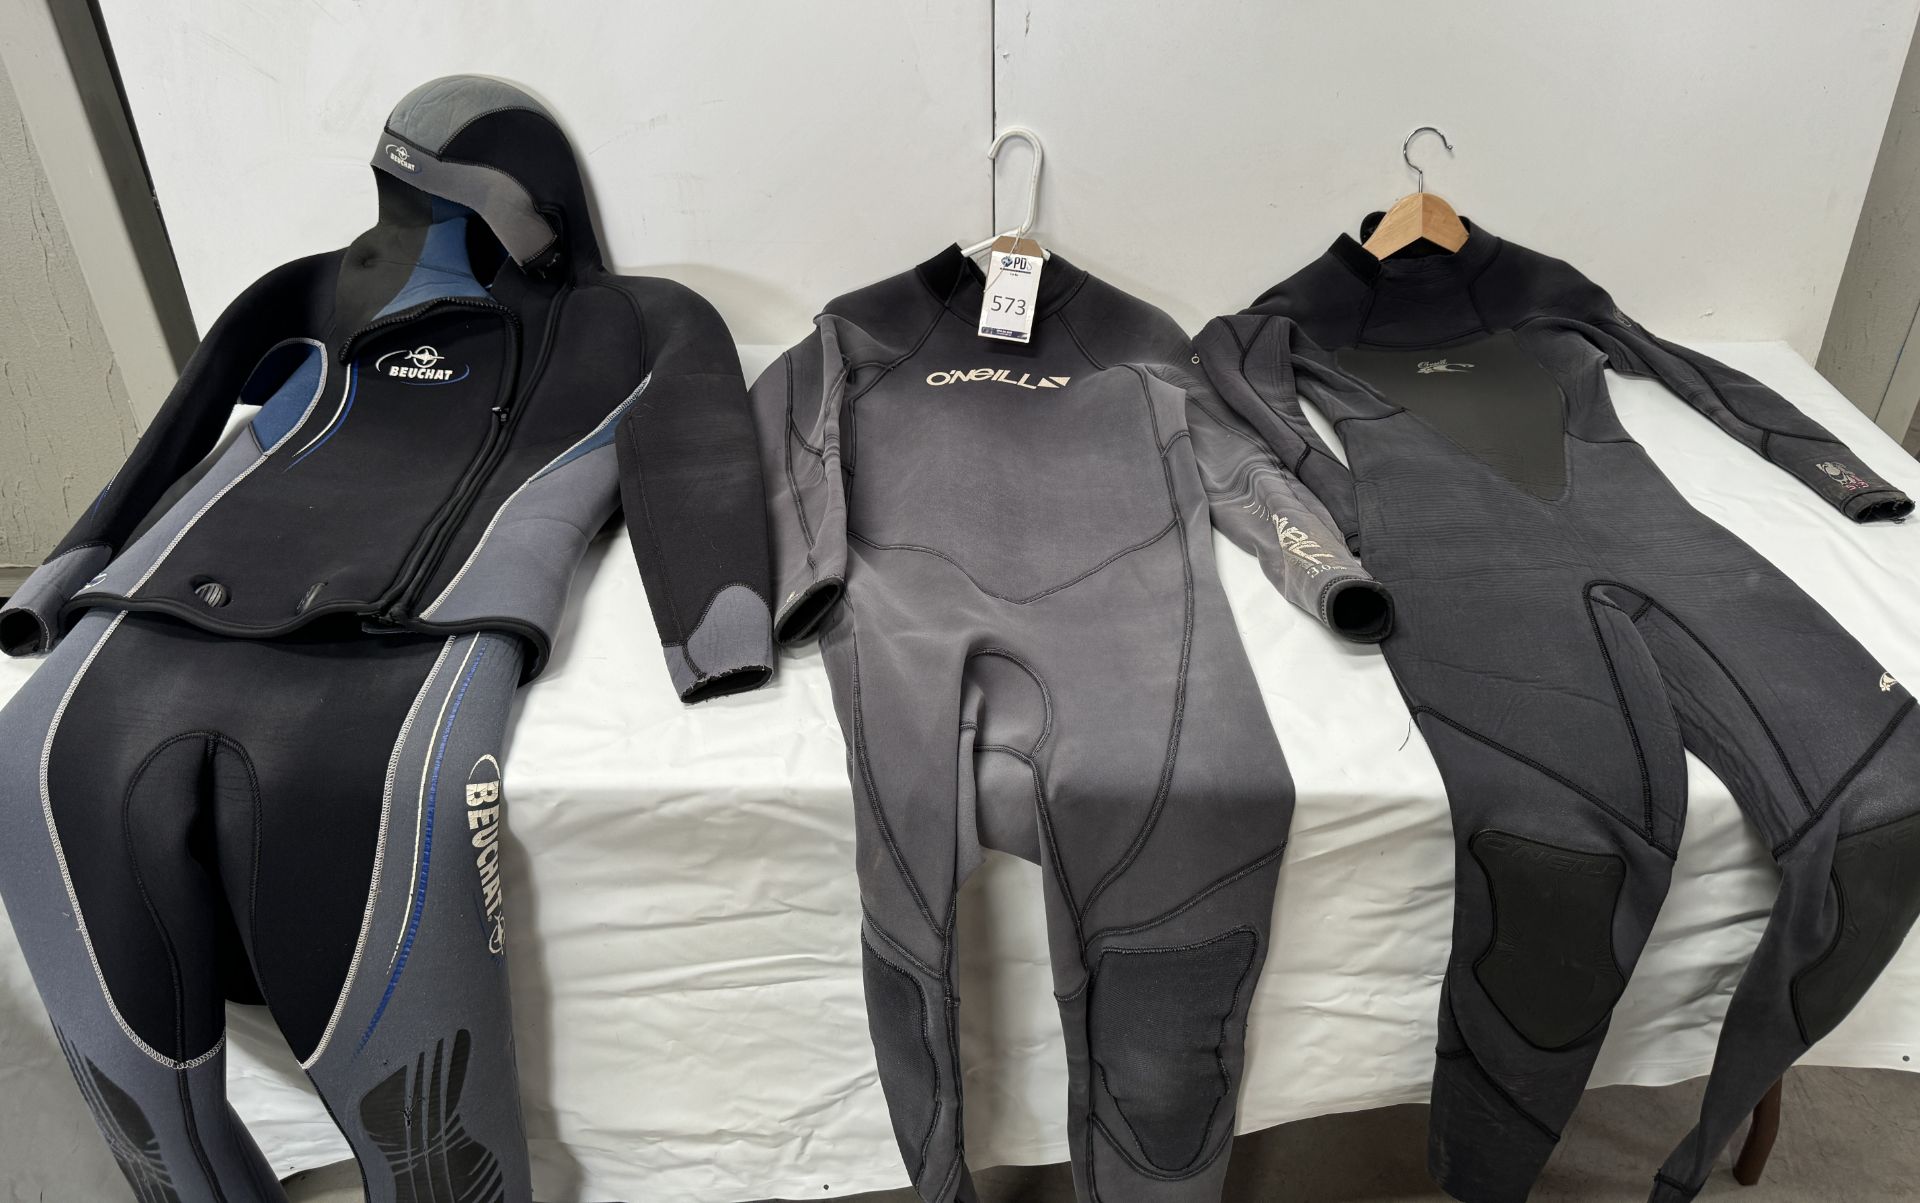 Six O’Neill, Beuchat, Seac Wetsuits (Location: Brentwood. Please Refer to General Notes)